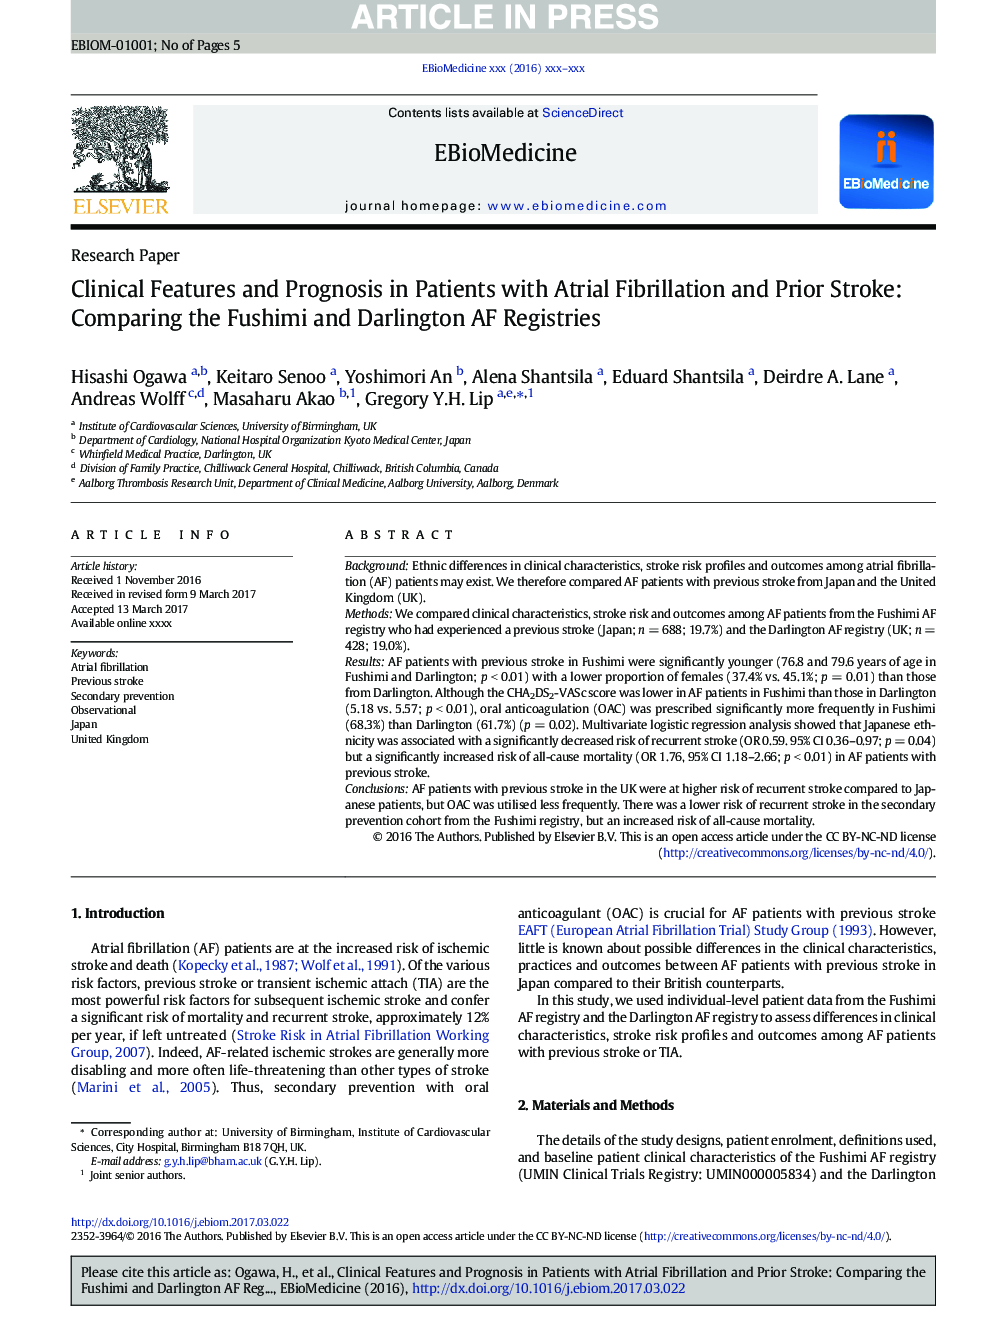 Clinical Features and Prognosis in Patients with Atrial Fibrillation and Prior Stroke: Comparing the Fushimi and Darlington AF Registries